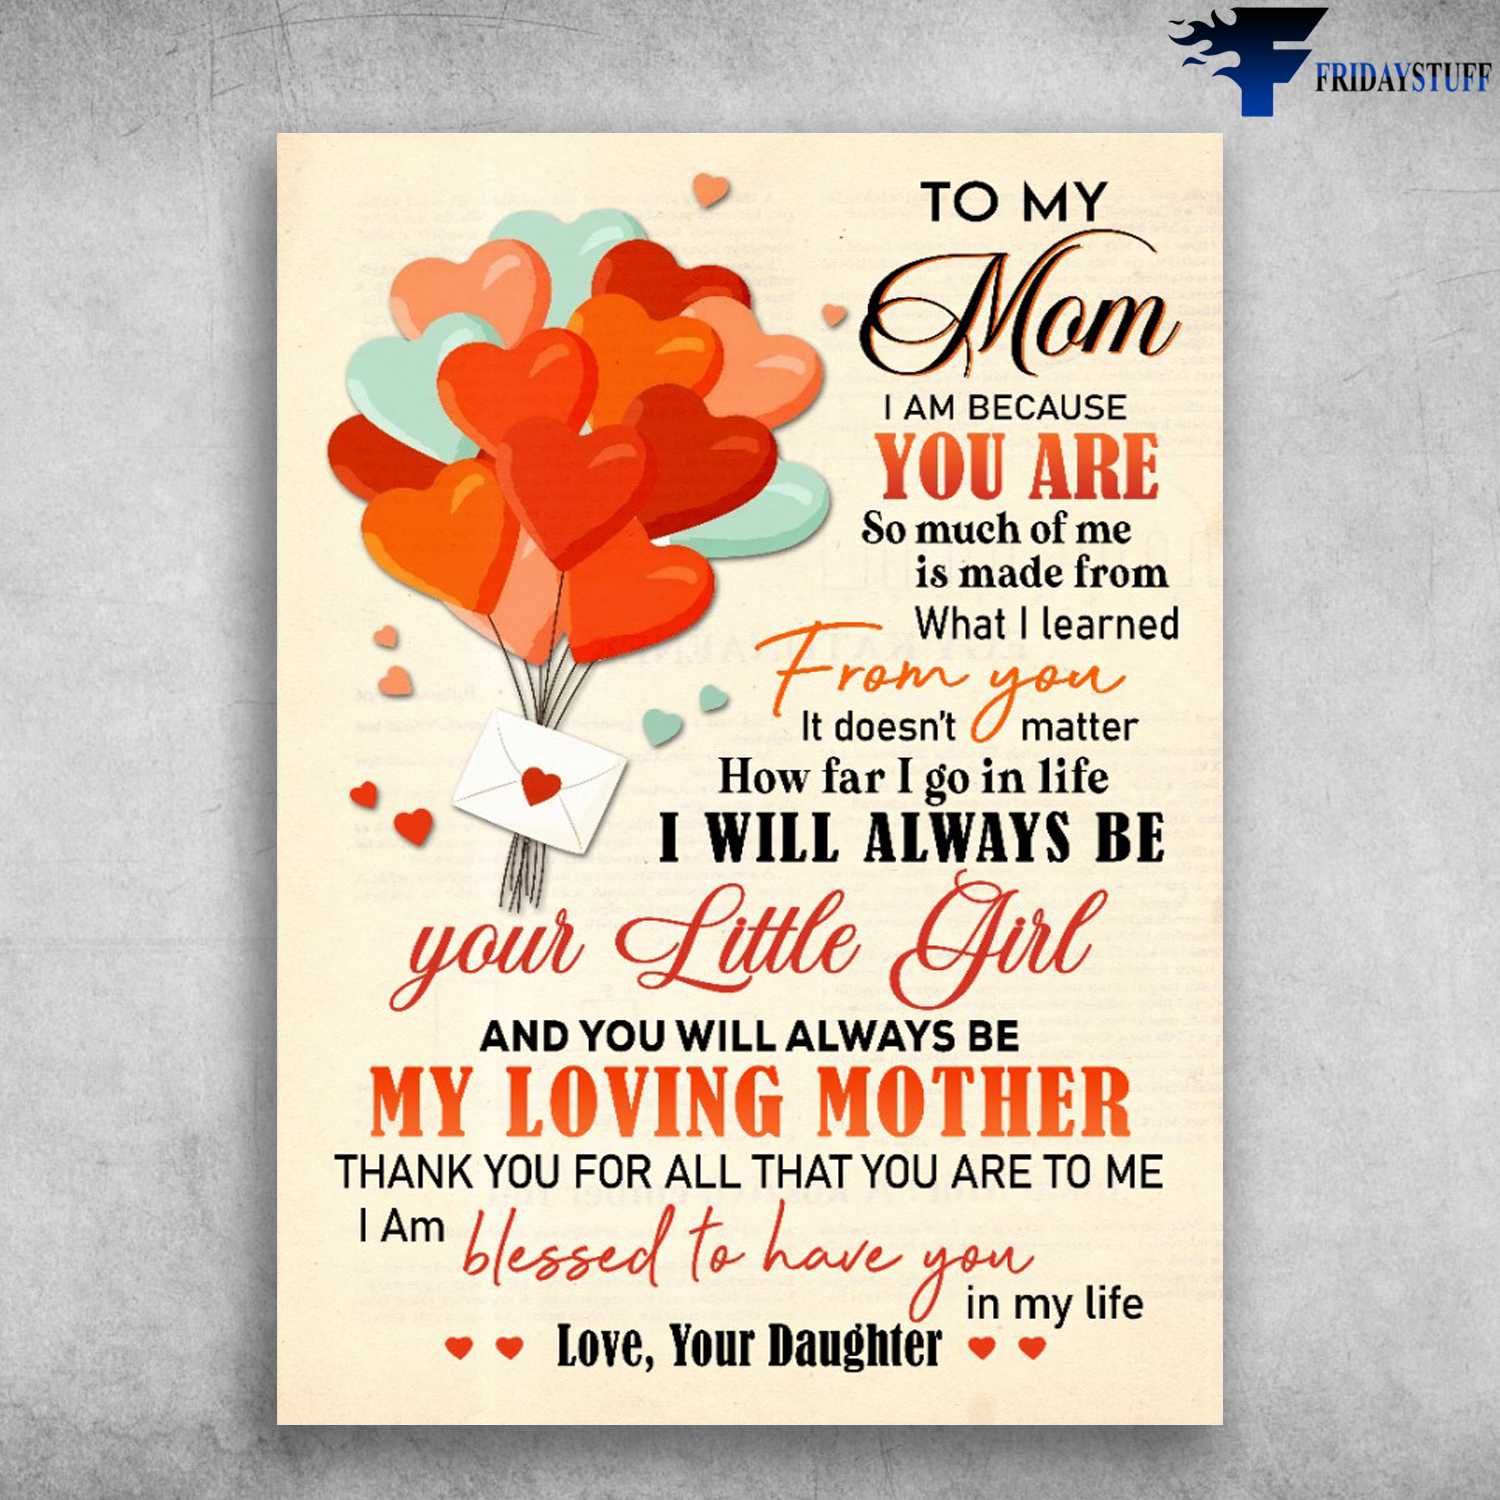 Mom And Daughter, To My Mom, I Am Because You Are So Much Of Me, I Made From What I Learned From You, It Doesn't Matter, How Far I Go in Life